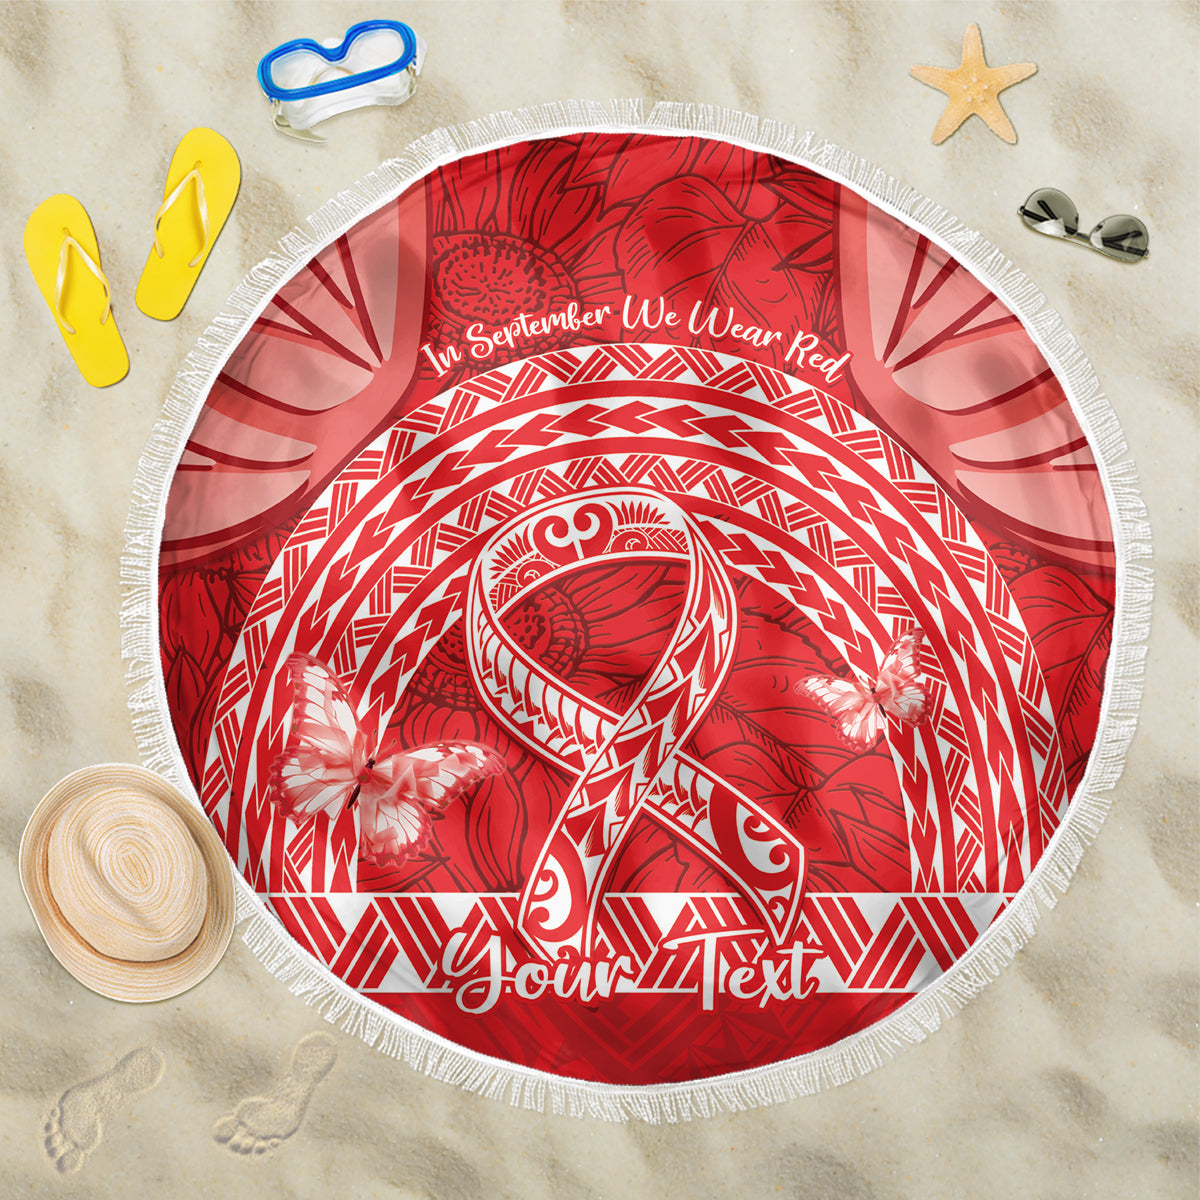 Personalised In September We Wear Red Beach Blanket Polynesia Blood Cancer Awareness